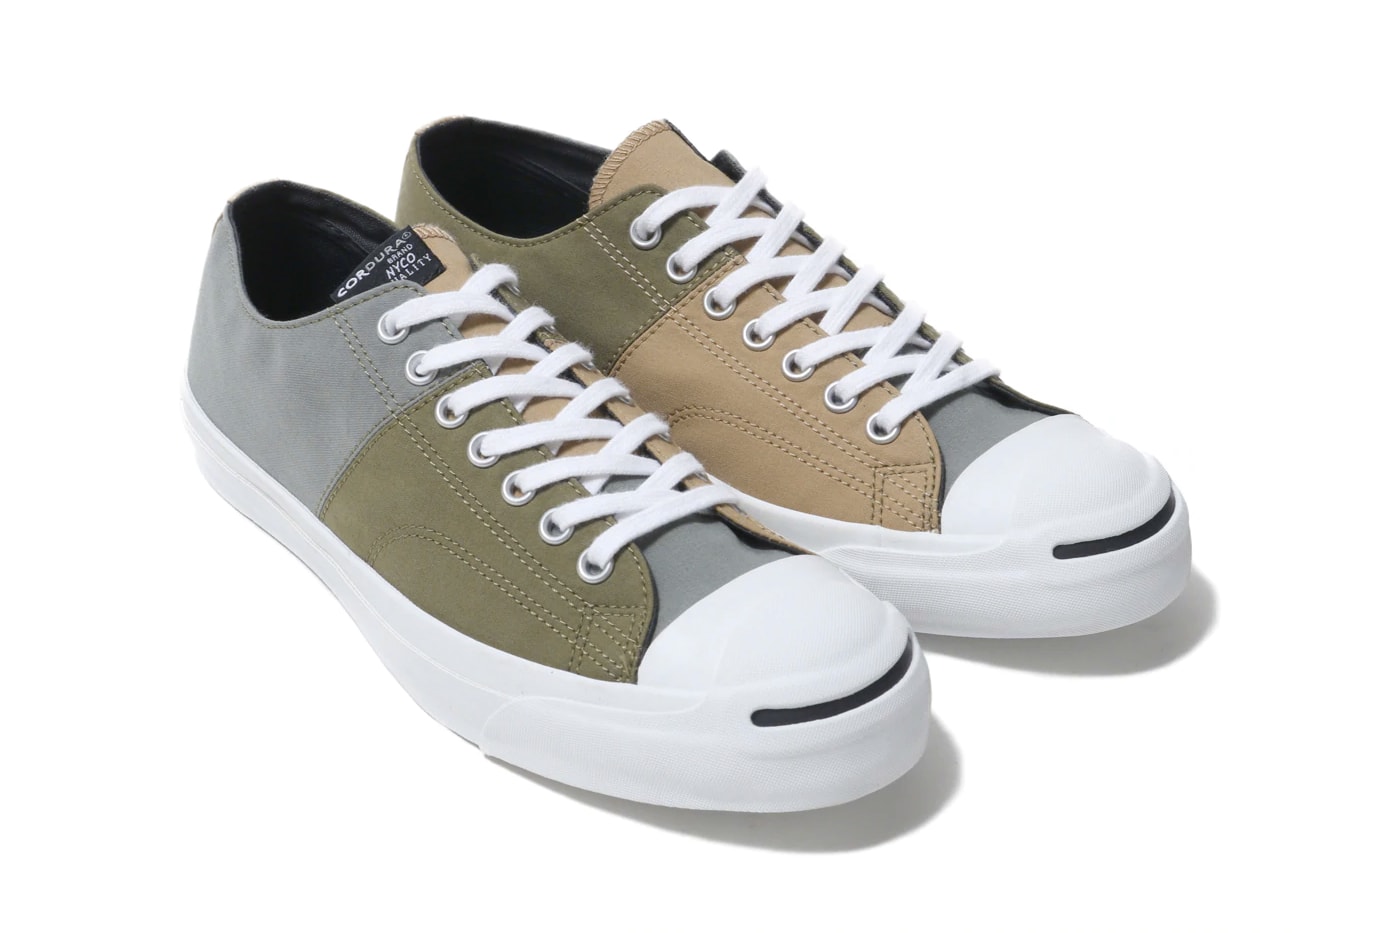 Converse Jack Purcell Cordura Nyco panels patchwork deconstruction earth tones olive beige grey white sneaker footwear classic shoe laces white